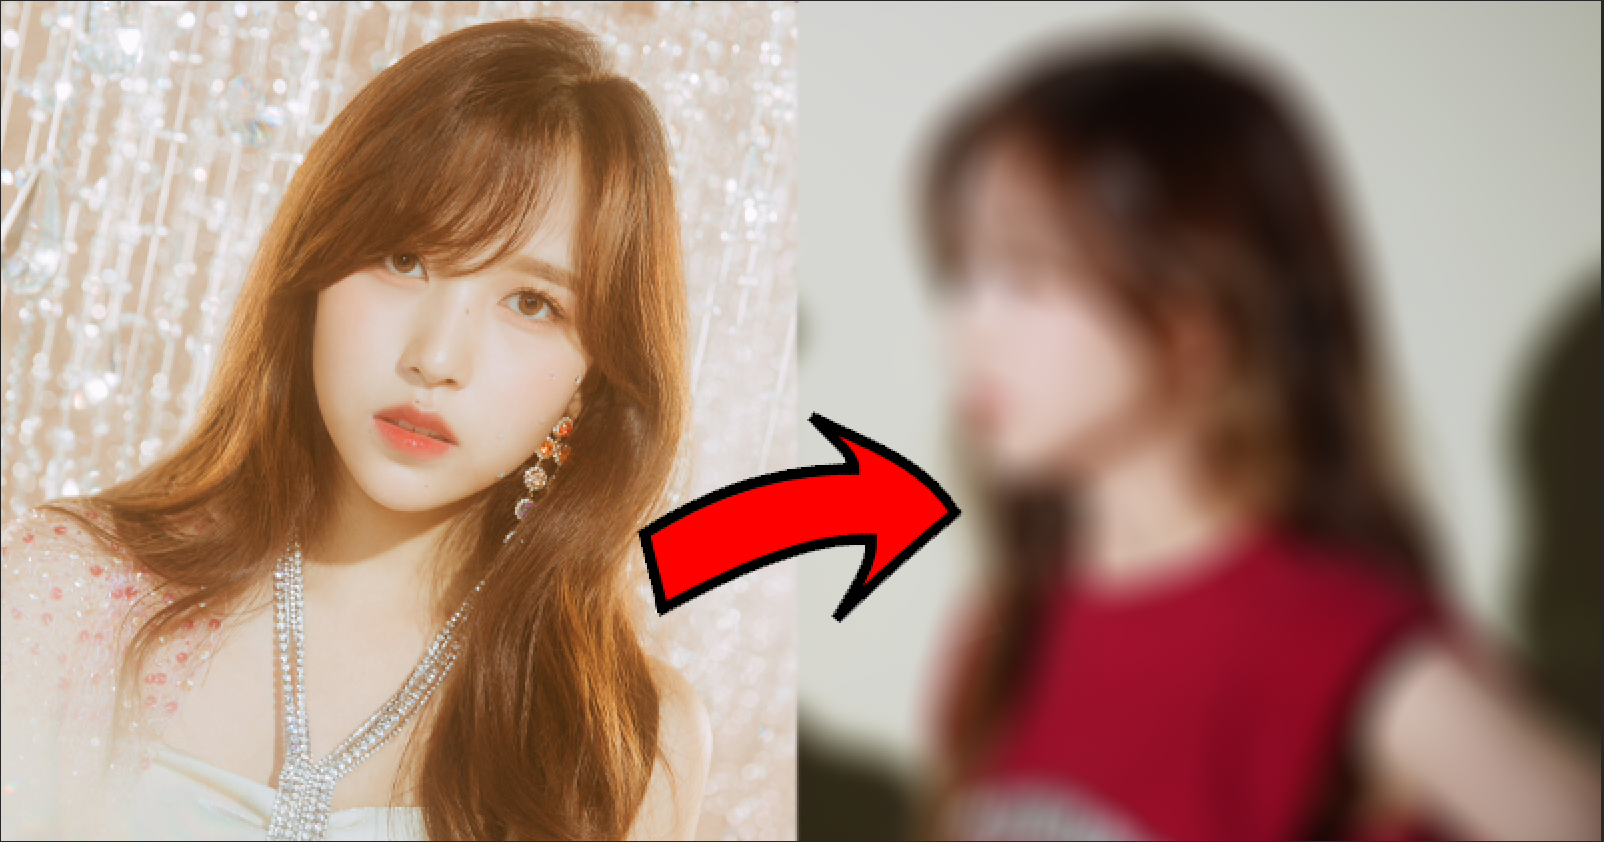 This JYPn Member is Gaining Attention for Resemblance to TWICE Mina